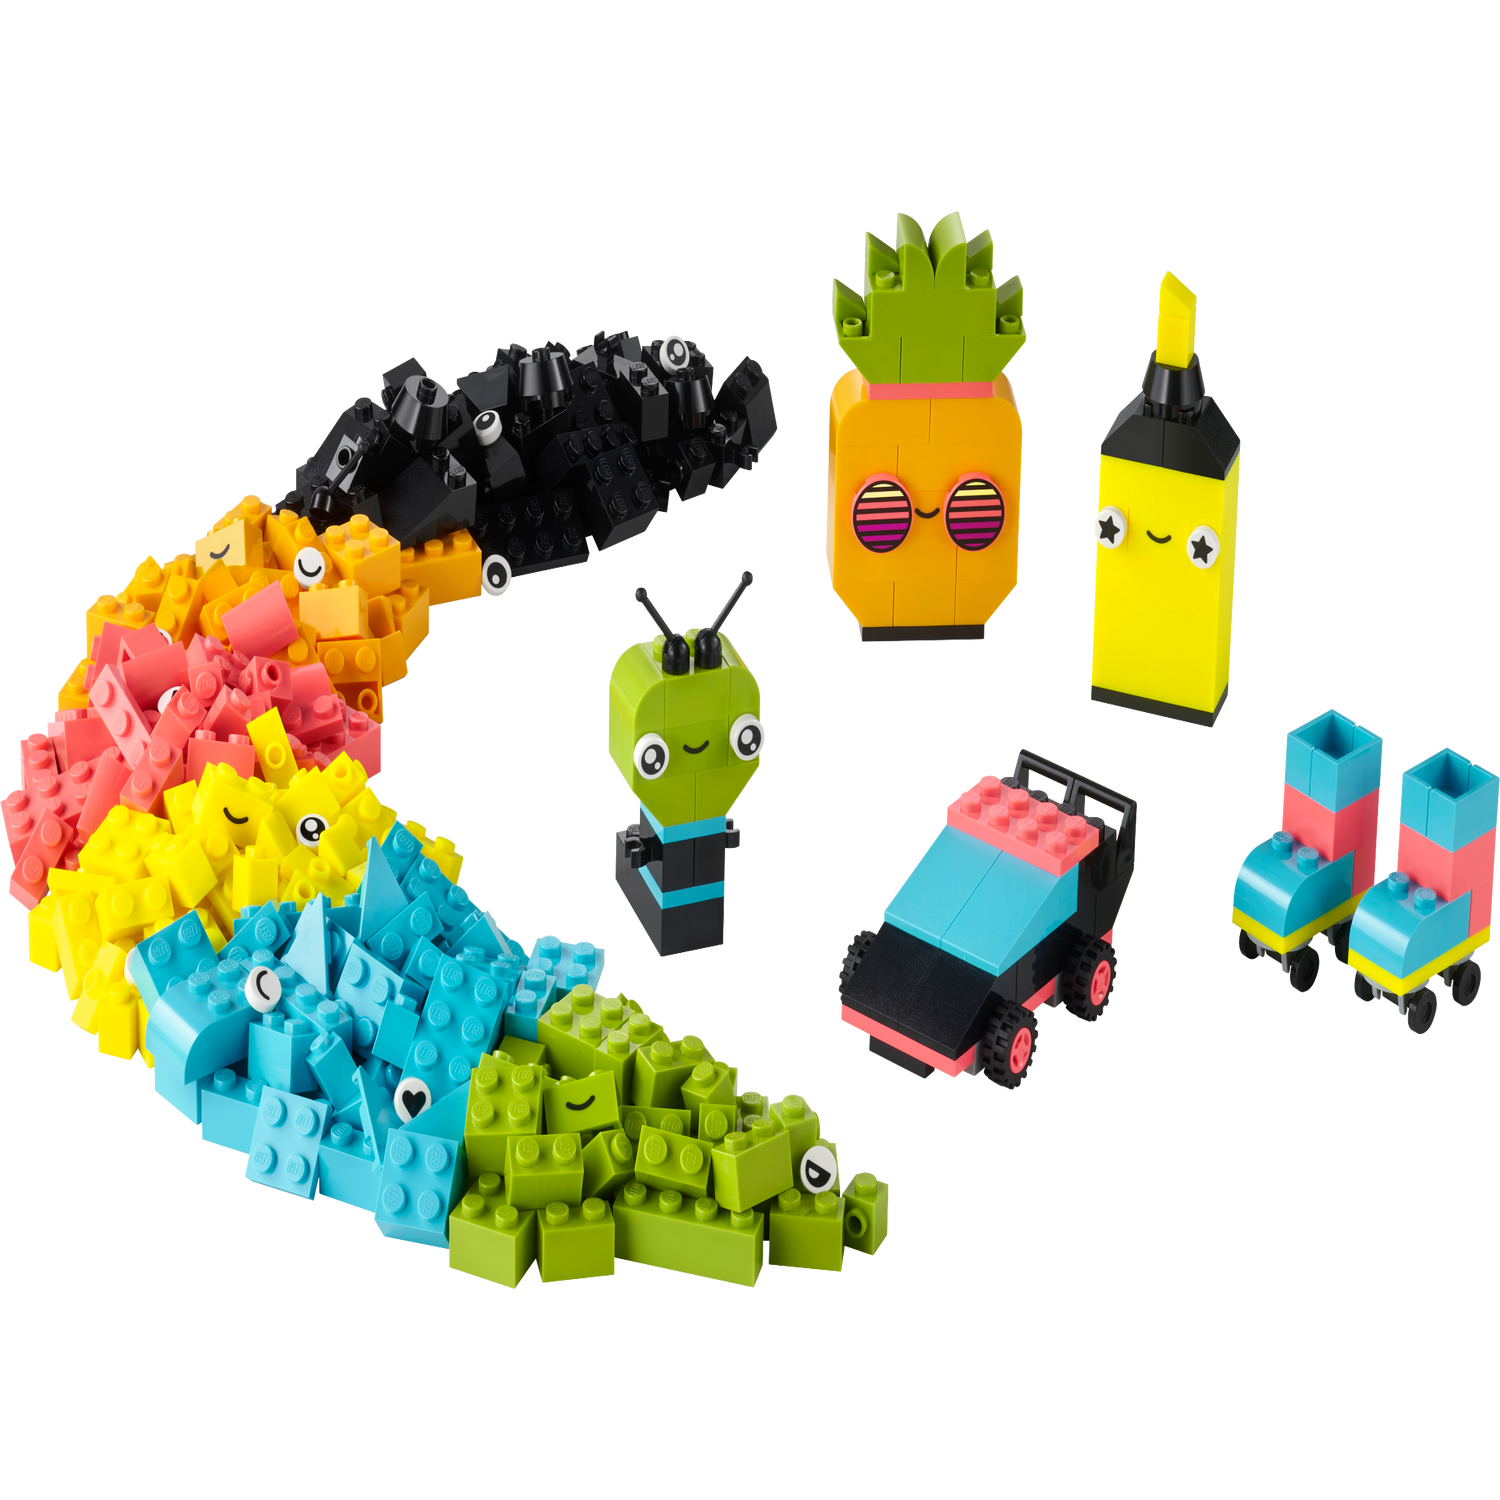 Creative Neon Fun 11027 | Classic | Buy online at the Official LEGO® Shop US